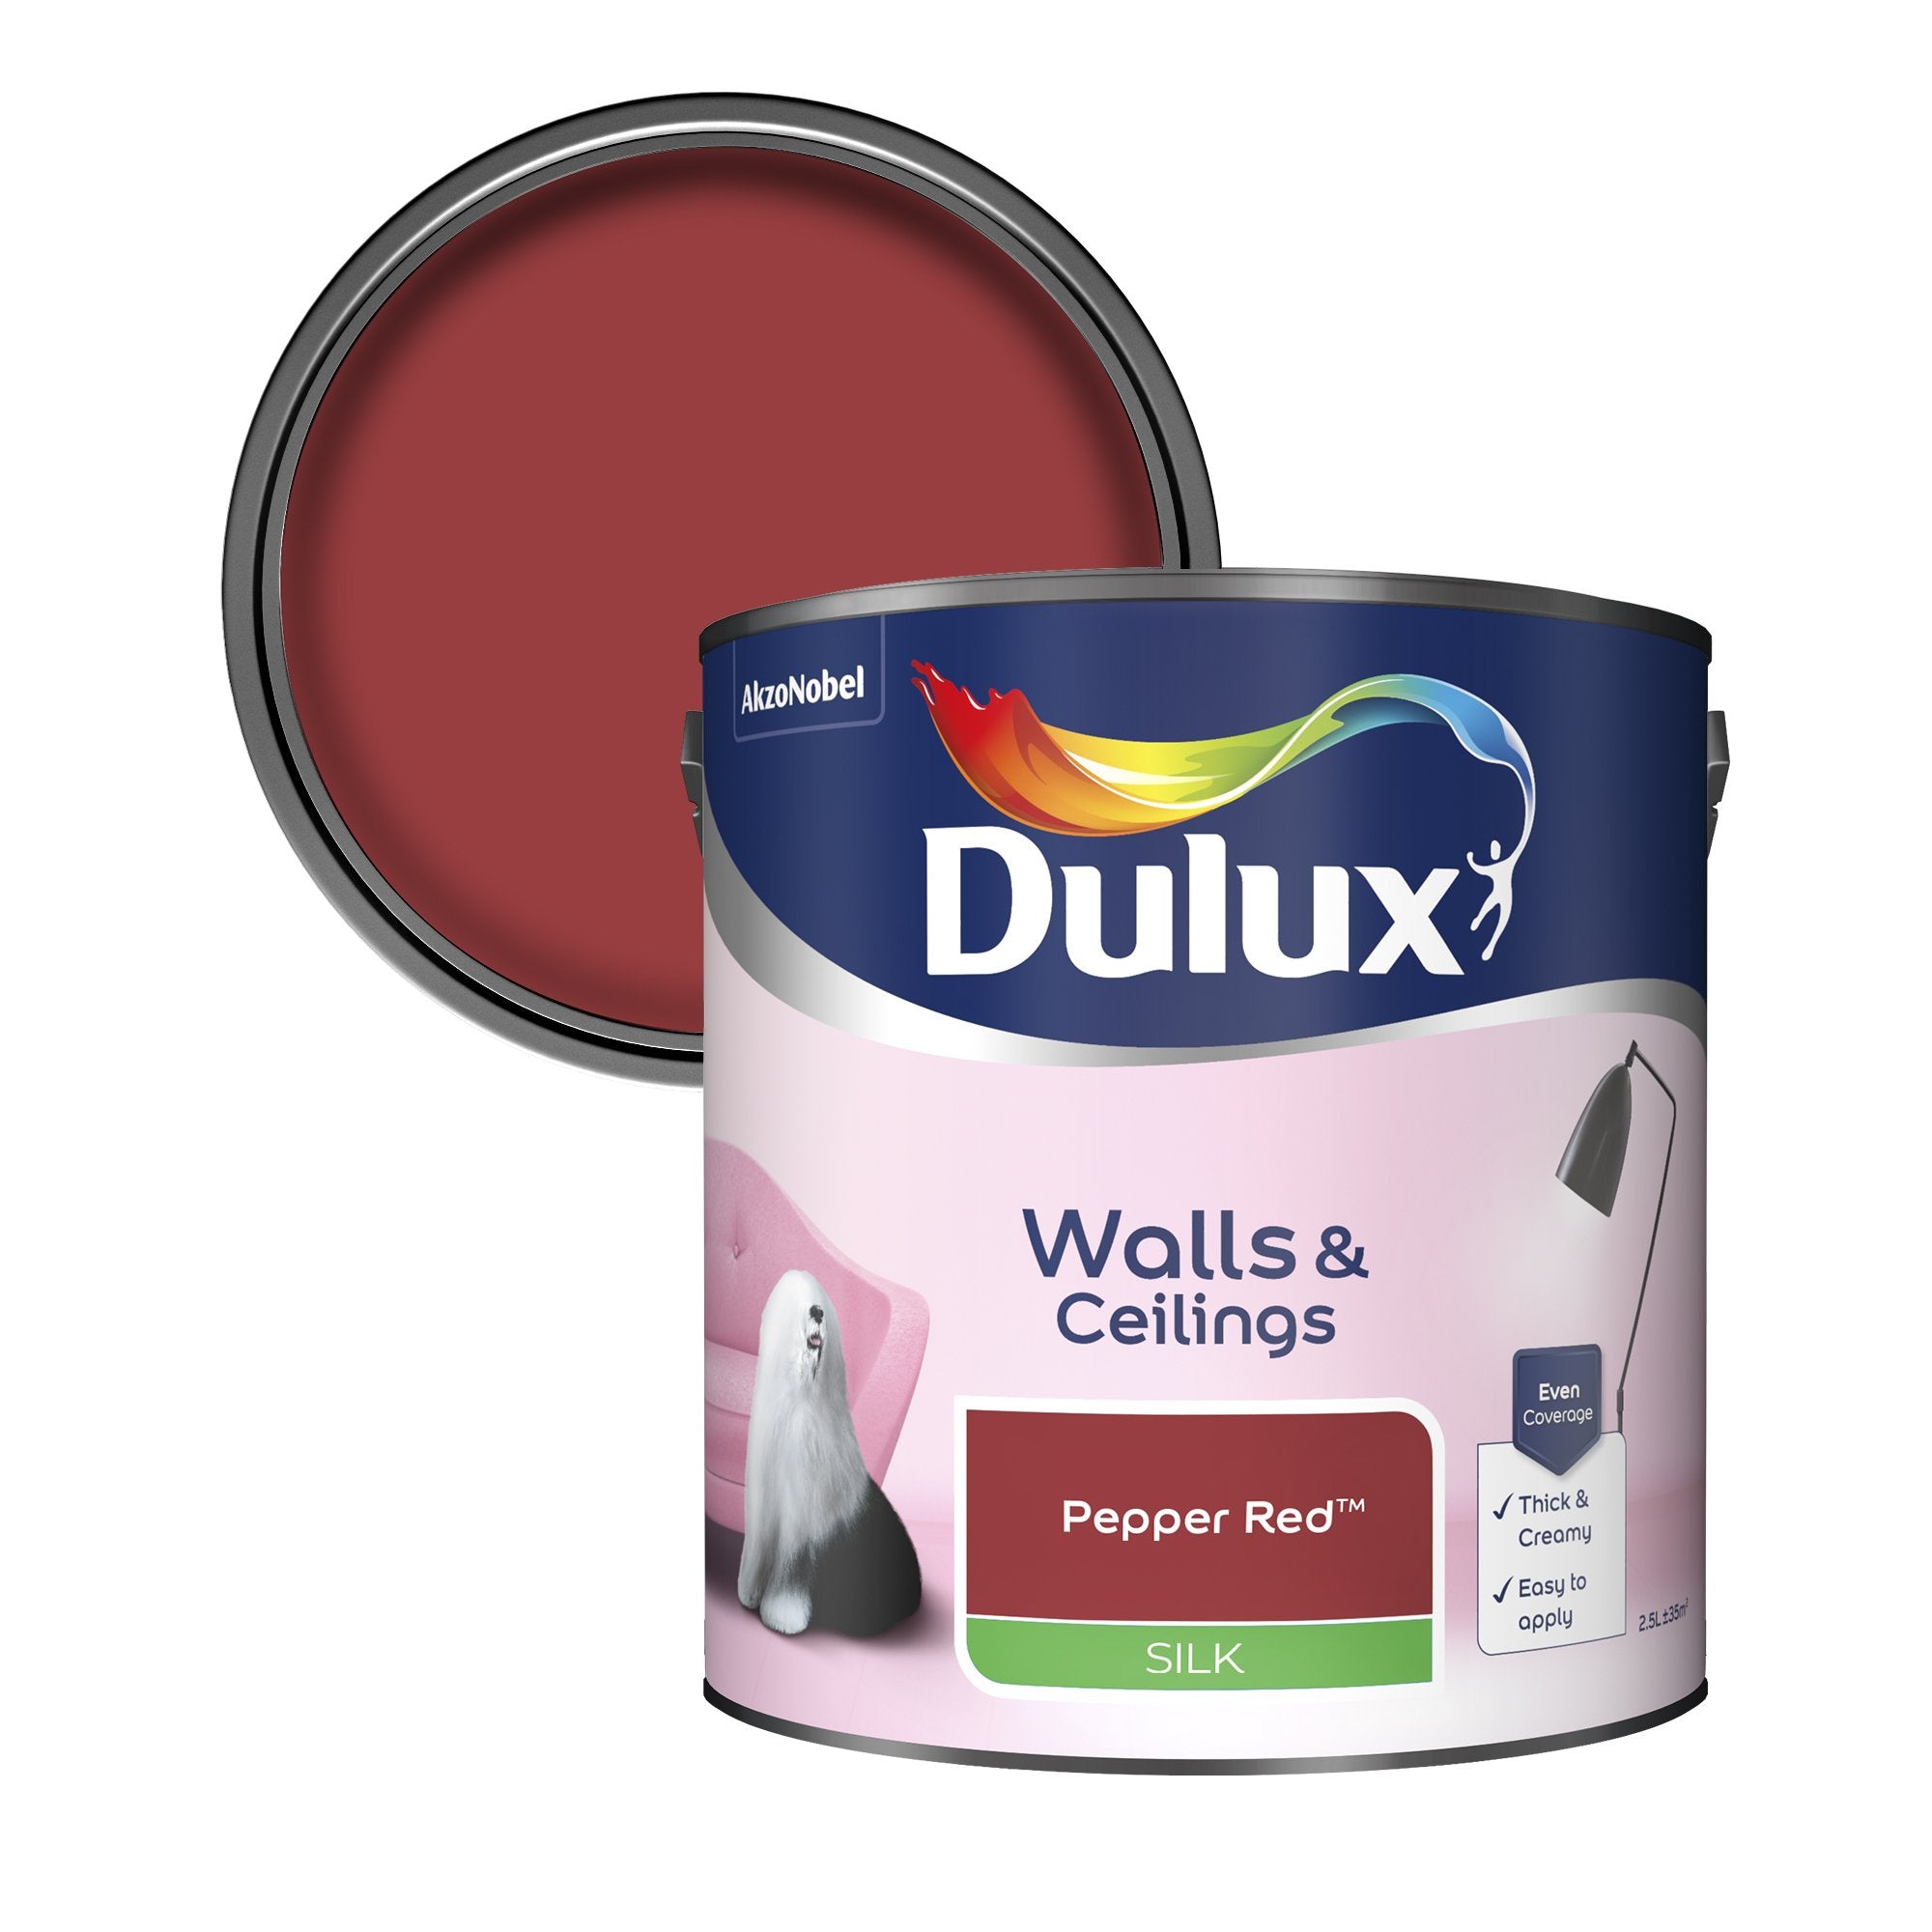 Dulux-Silk-Emulsion-Paint-For-Walls-And-Ceilings-Pepper-Red-2.5L